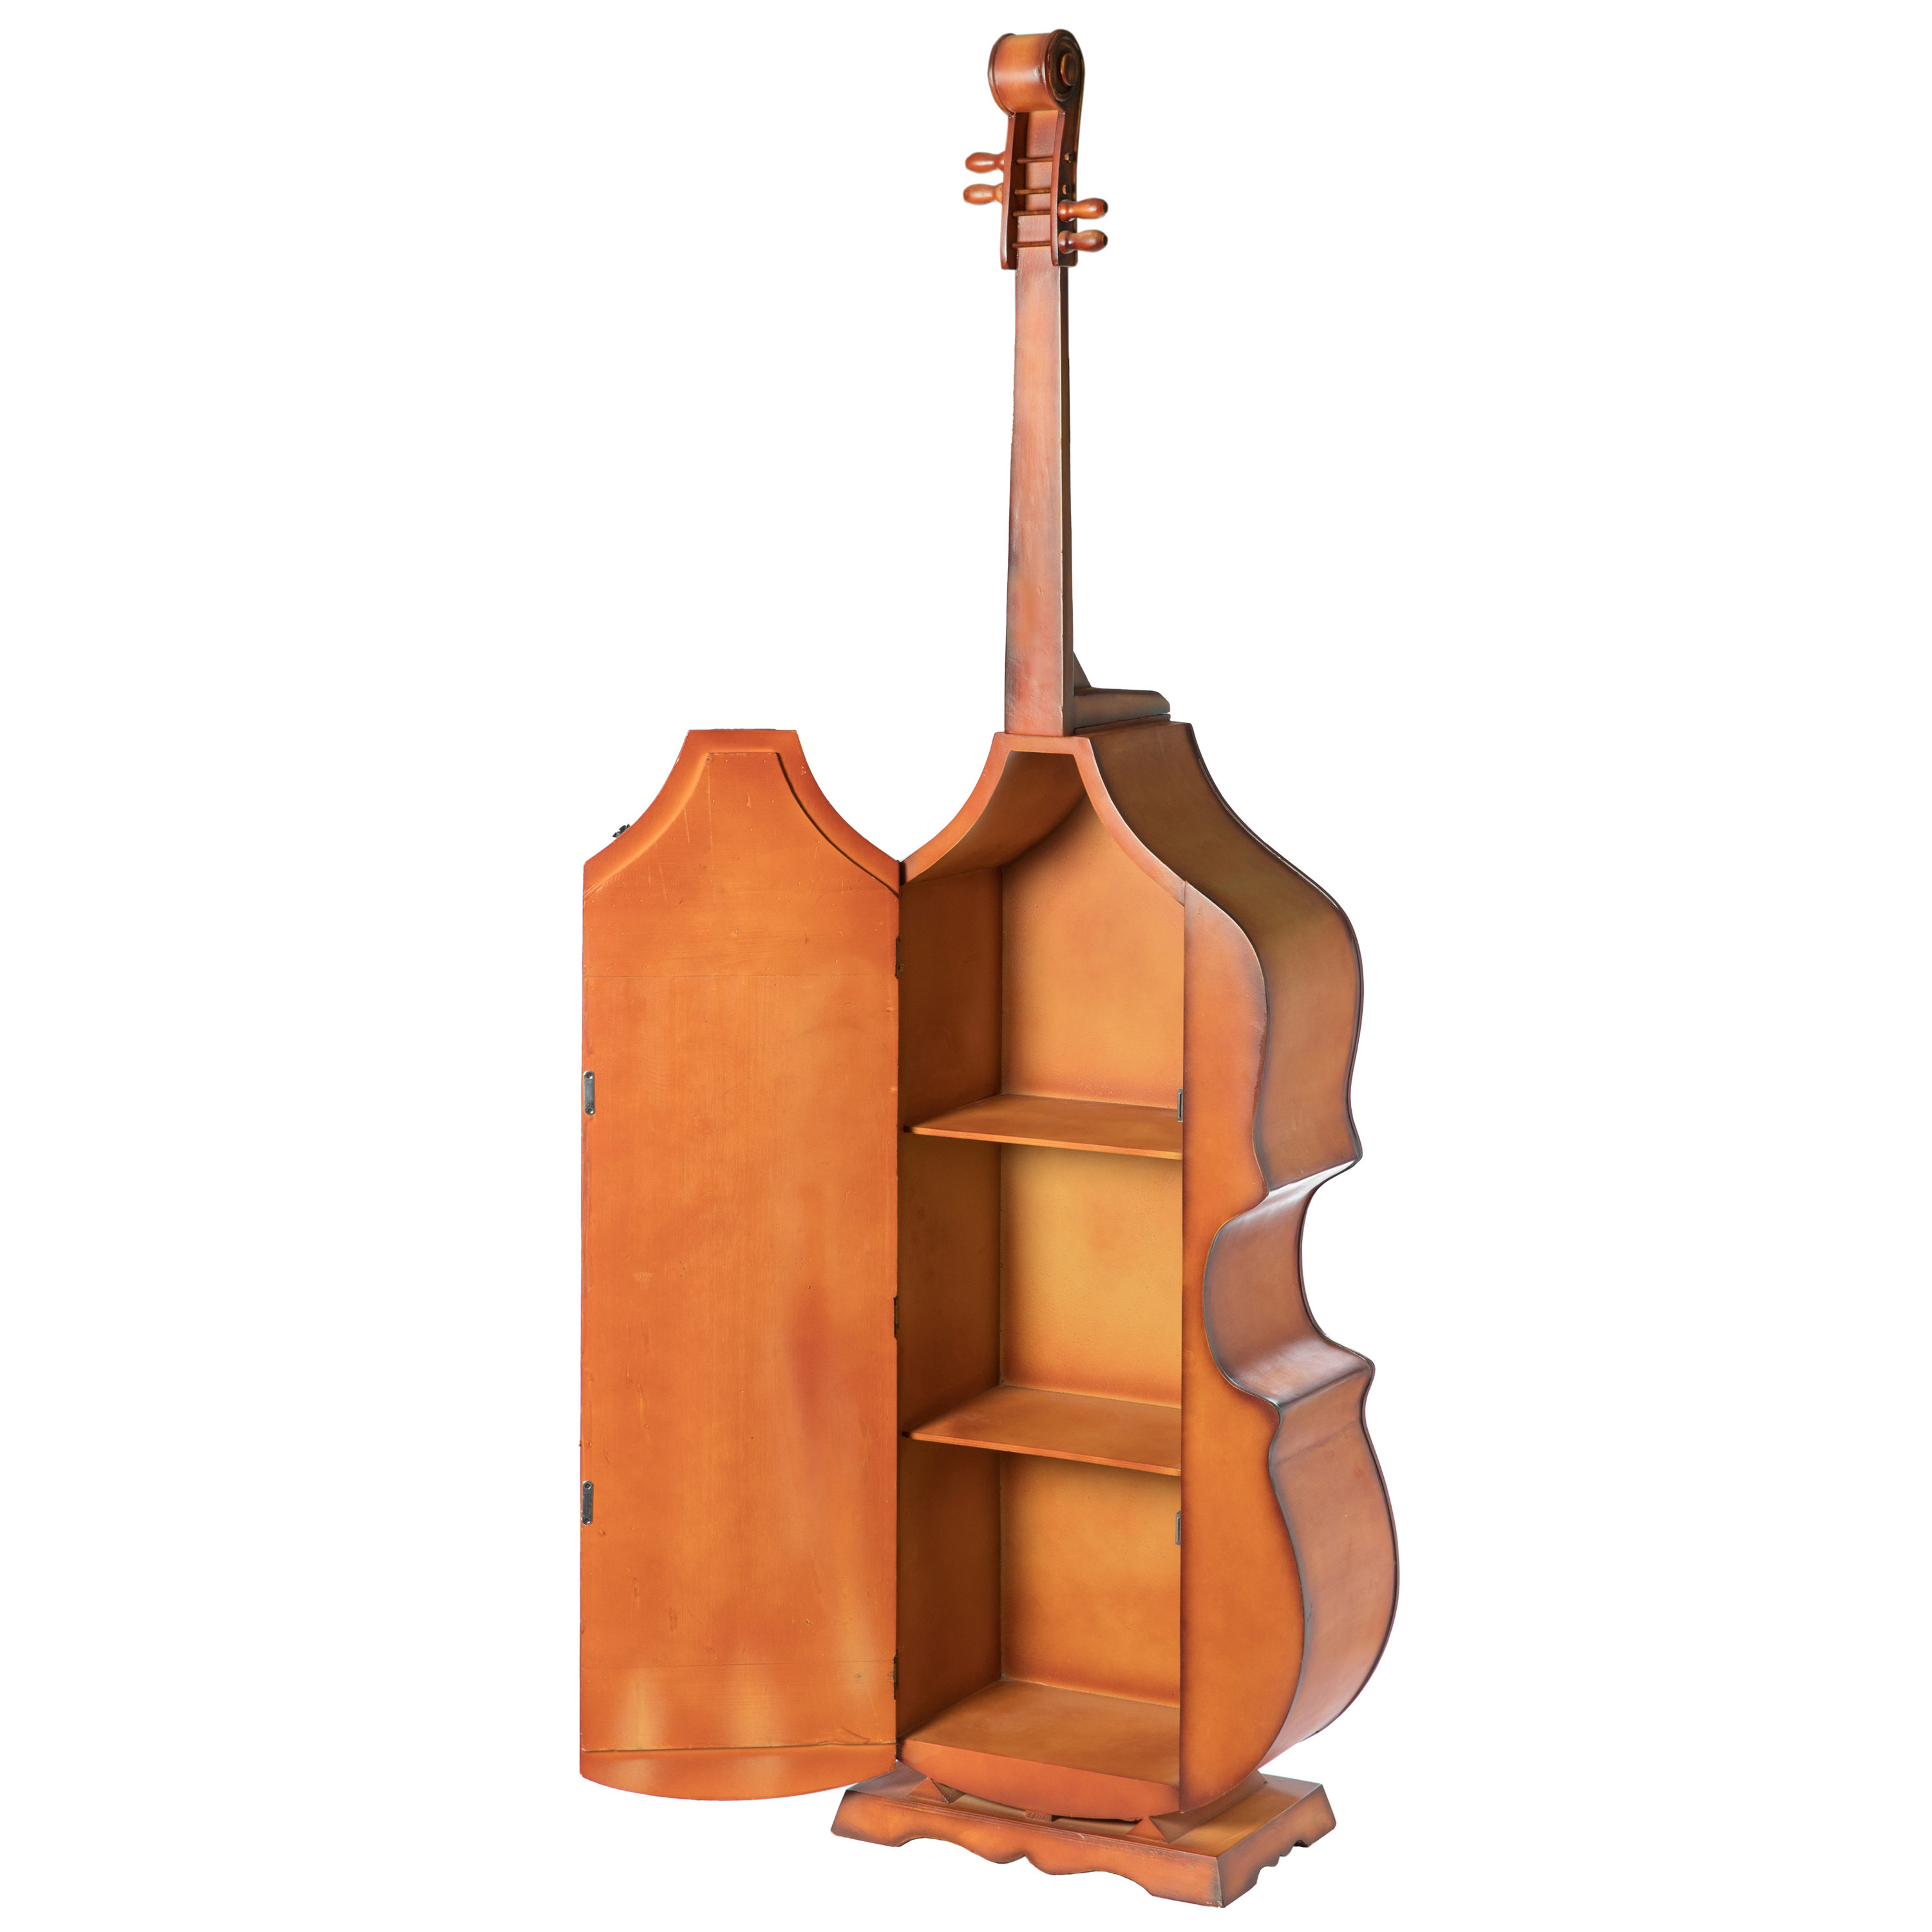 6.5 Feet Tall Violin, 3 Shelf Large Violin Shaped Cabinet With Door